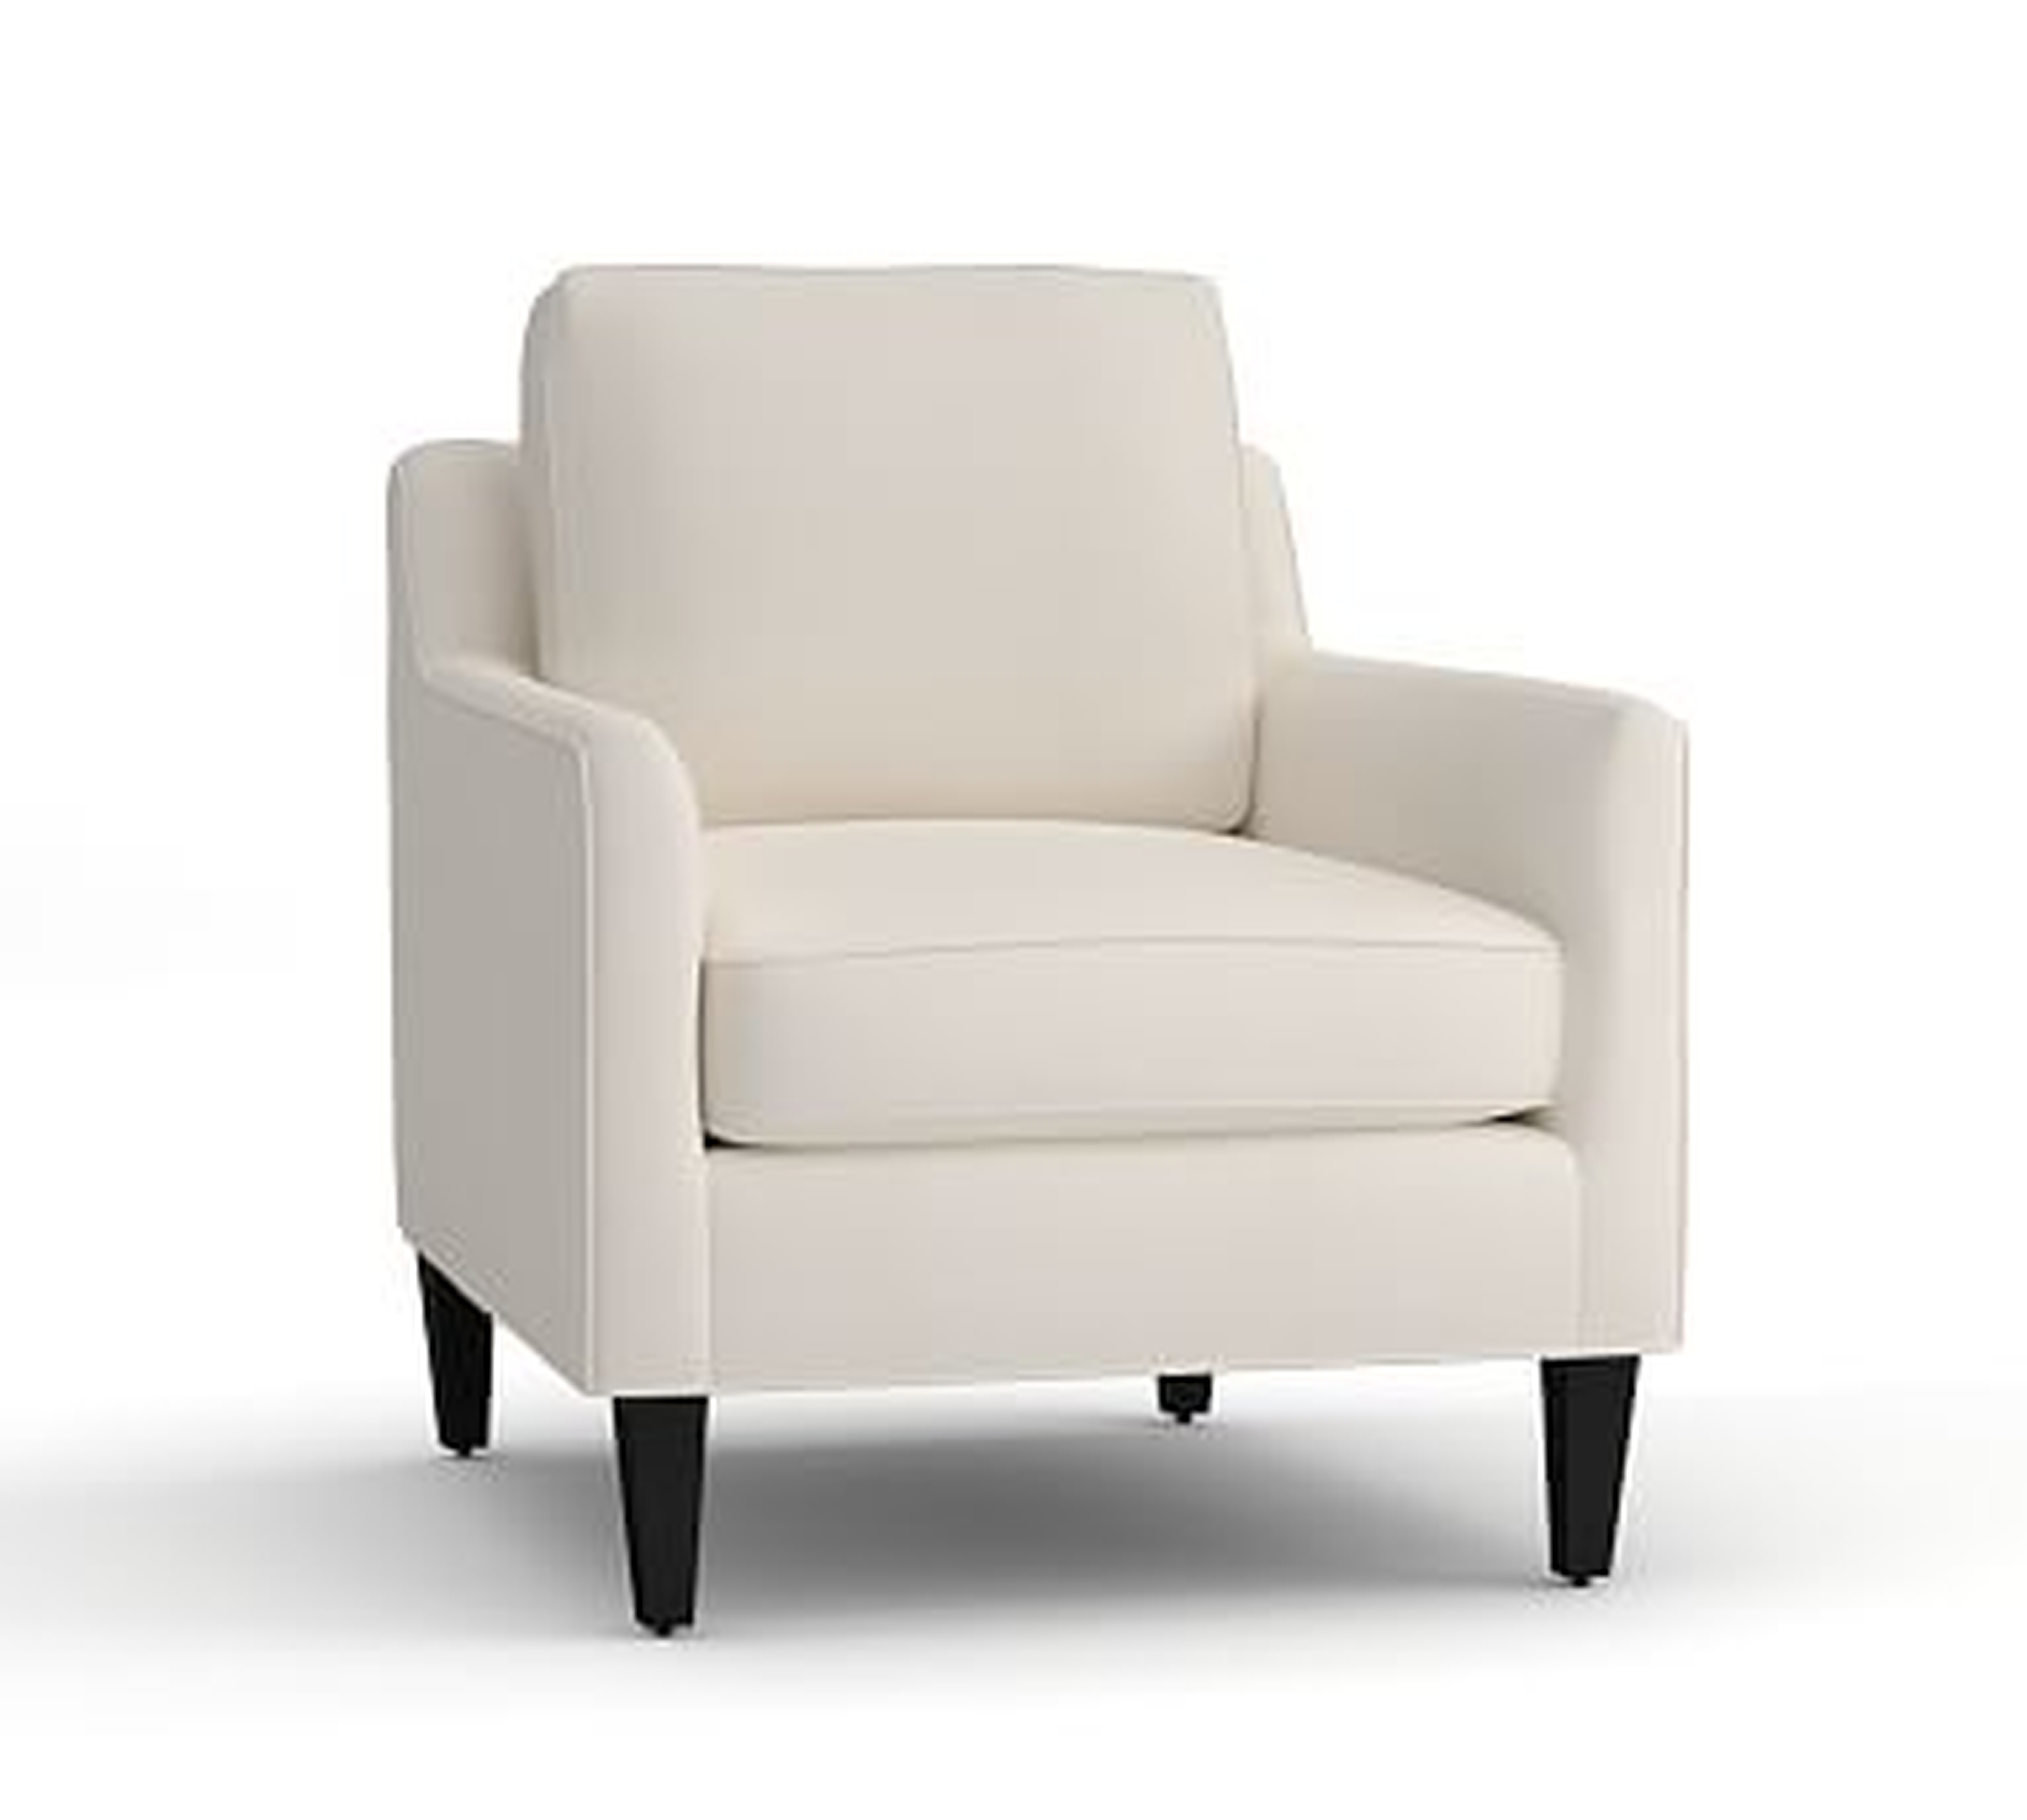 Beverly Upholstered Armchair, Performance Twill Warm White - Pottery Barn